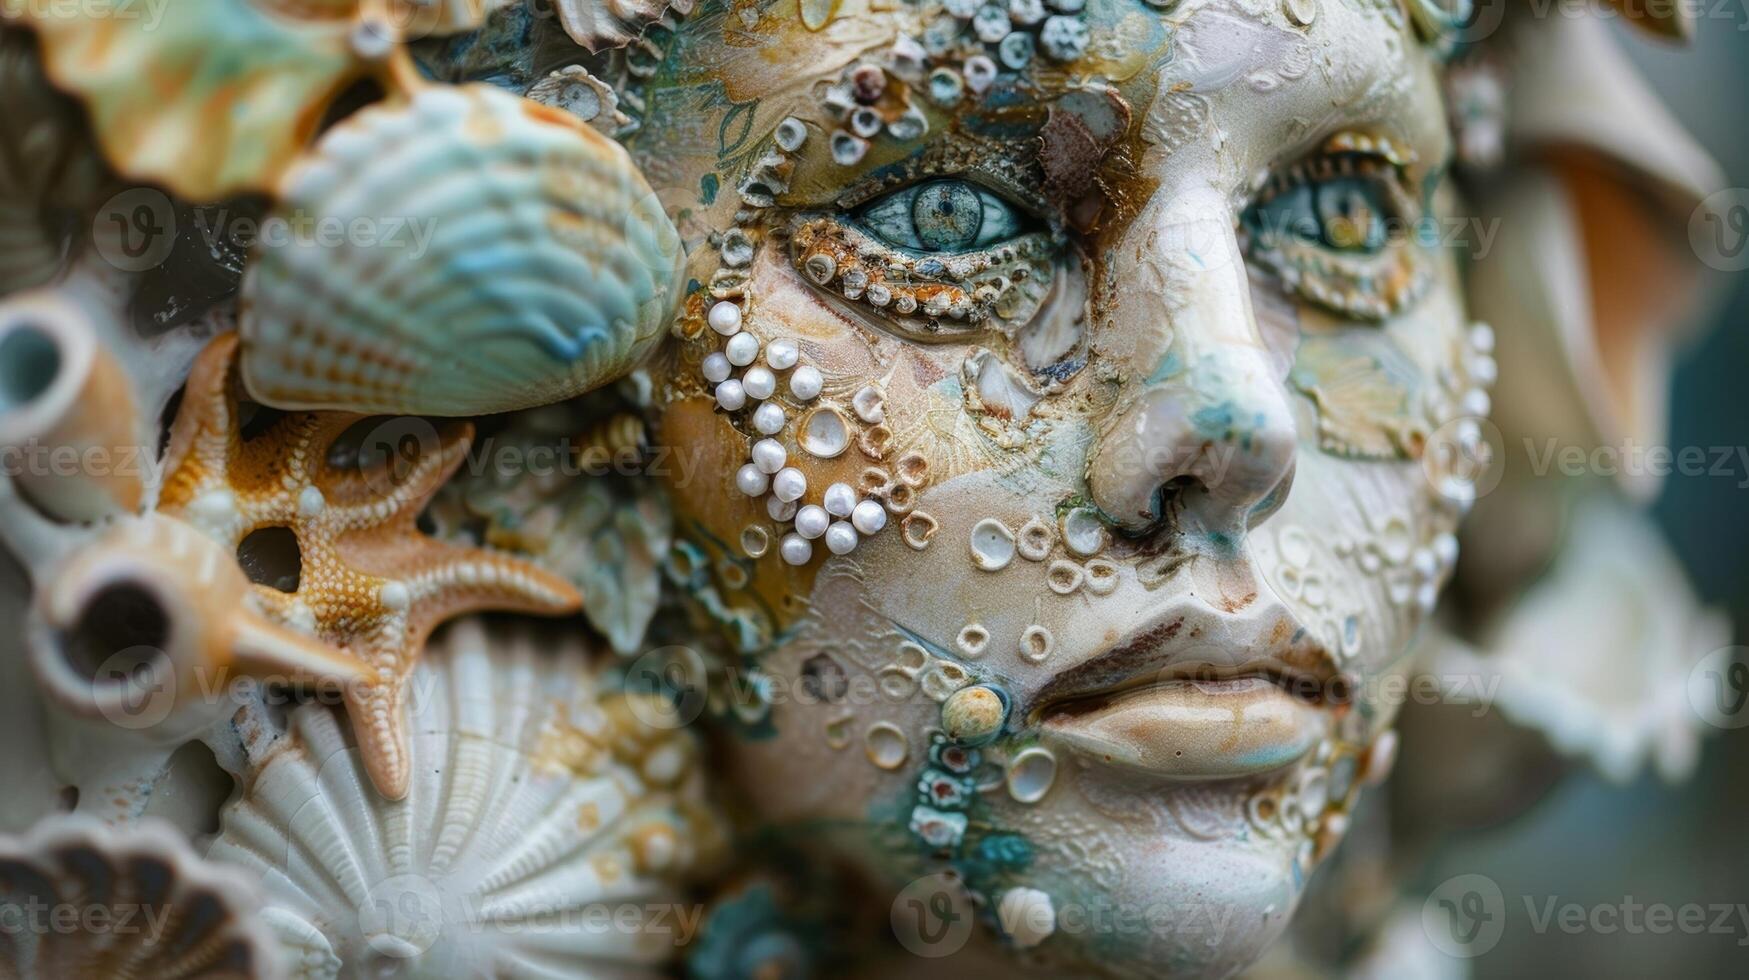 A series of ceramic masks adorned with seashells beads and other mixed media elements evoking the idea of a mythical sea creature come to life. photo